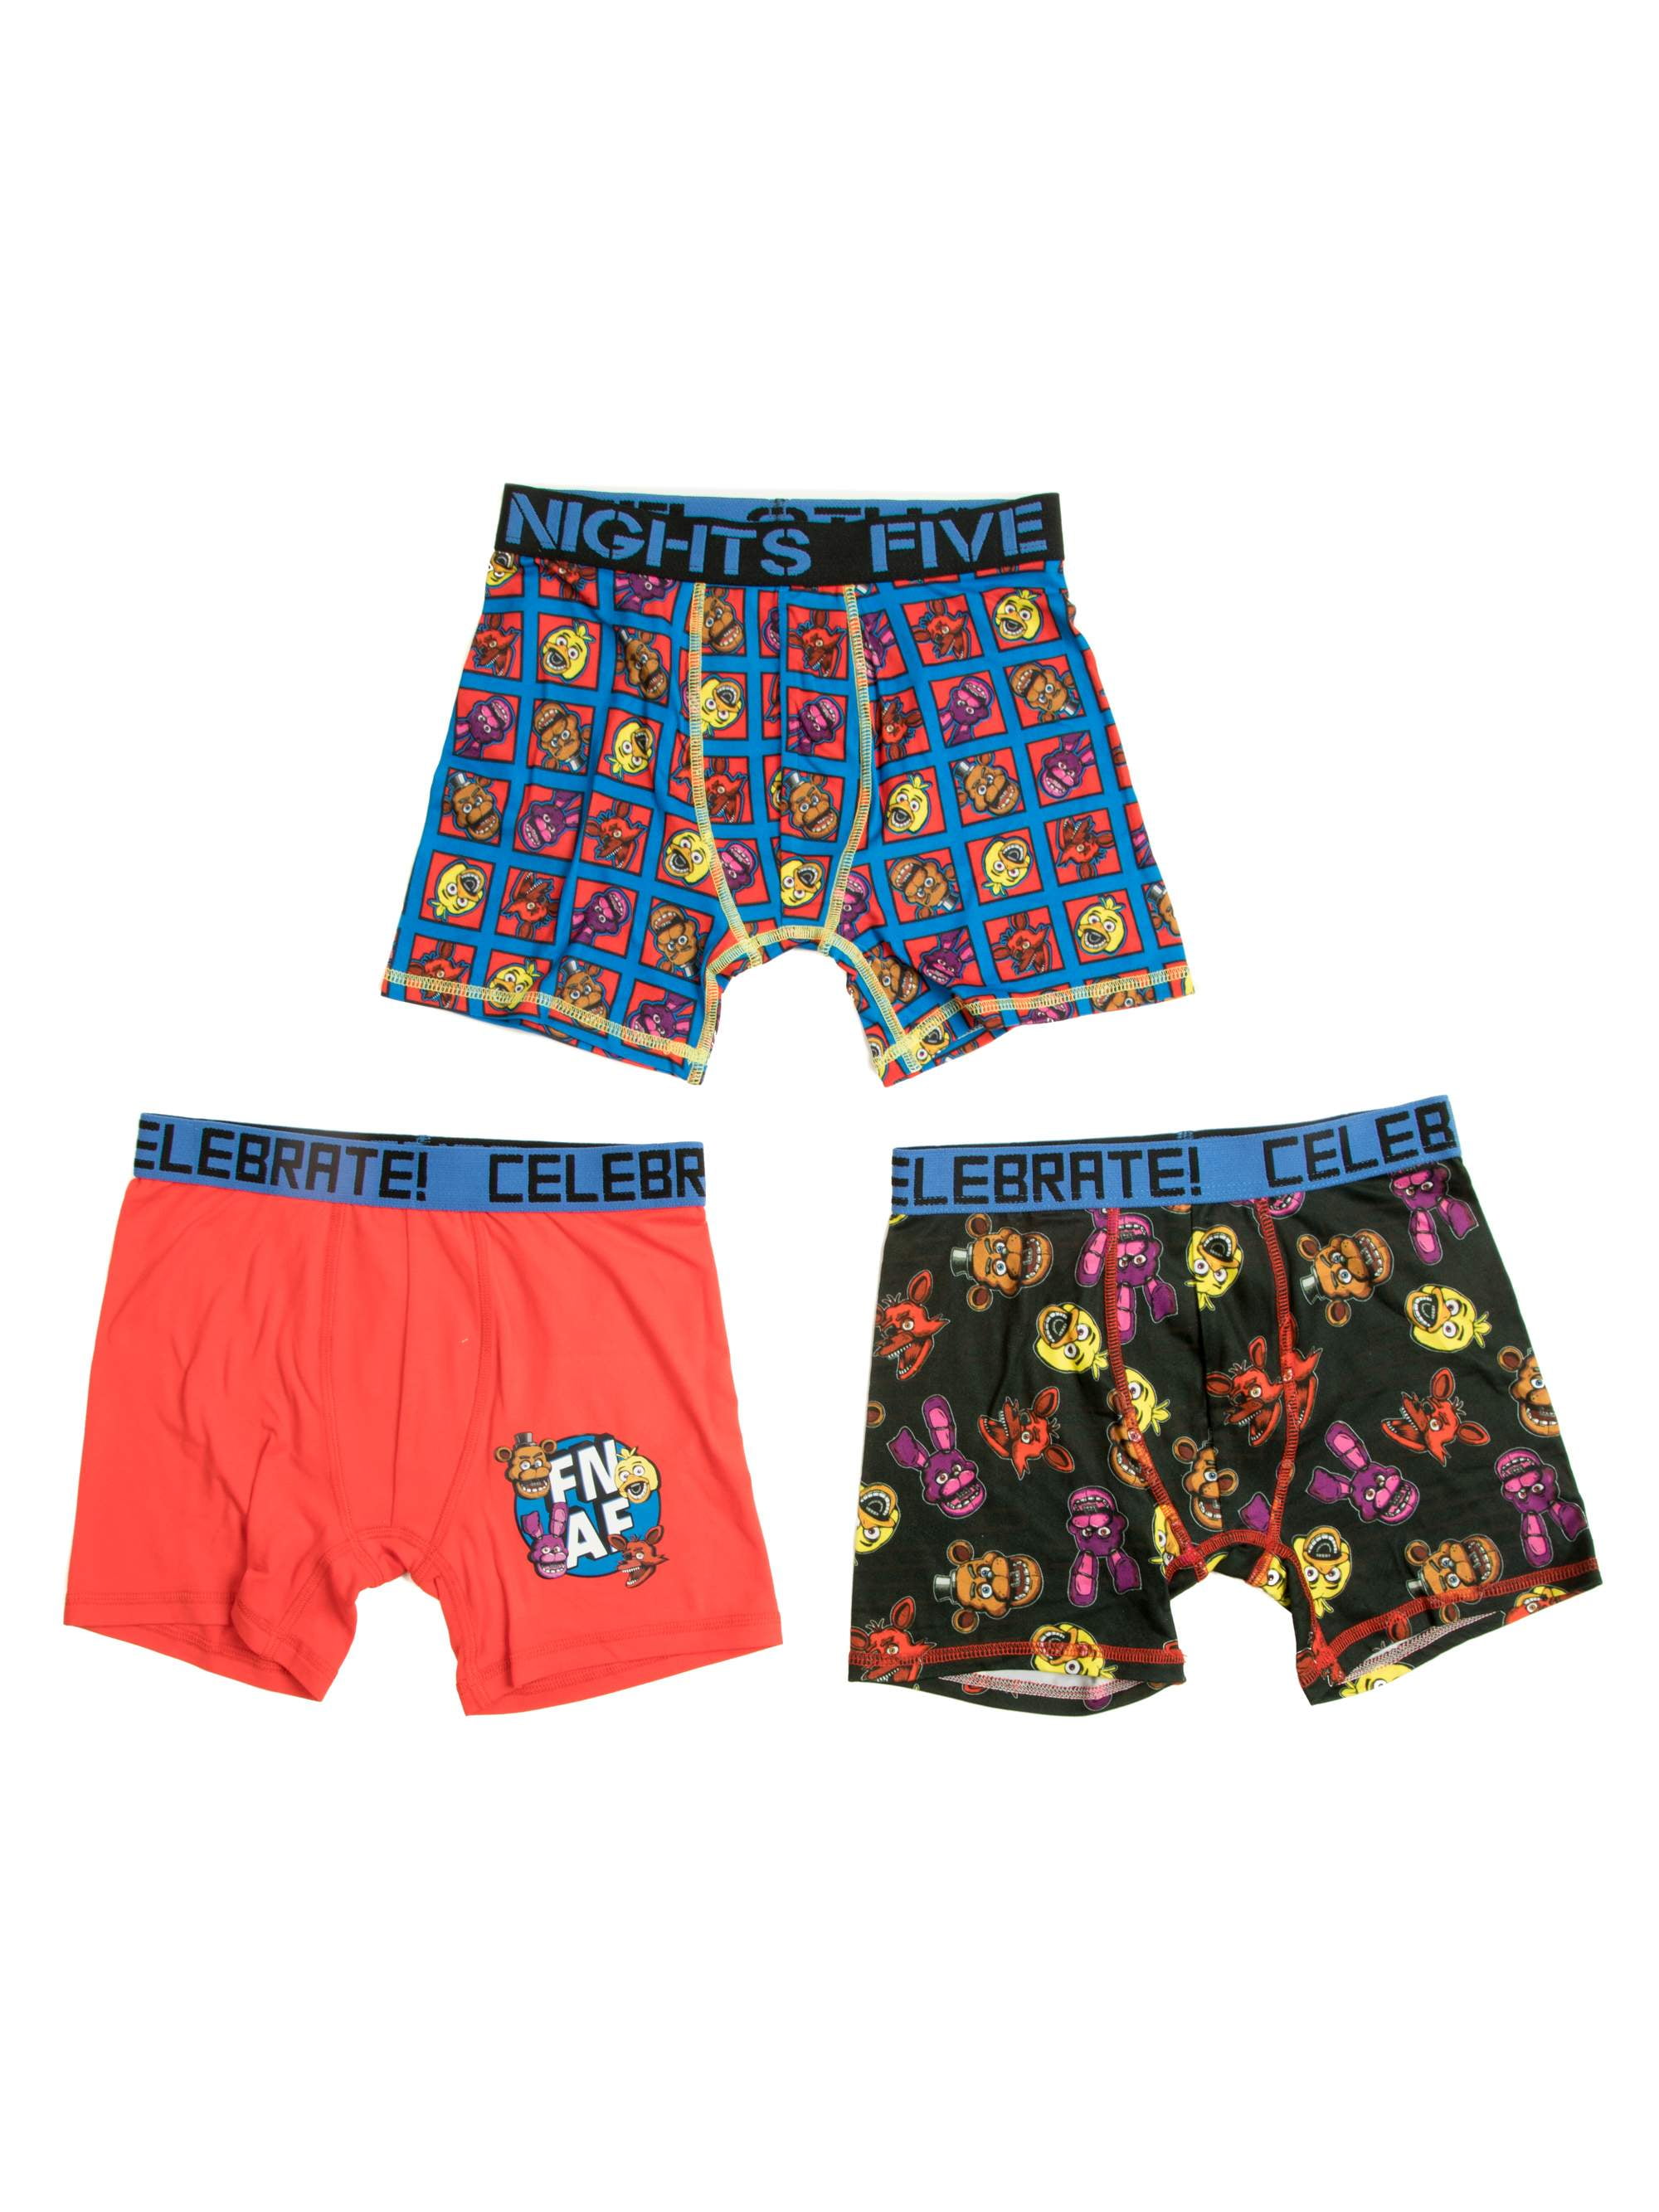 Five Nights At Freddy's Boy's Athletic Boxer Briefs Underoos SMALL 3 Pack Celebr